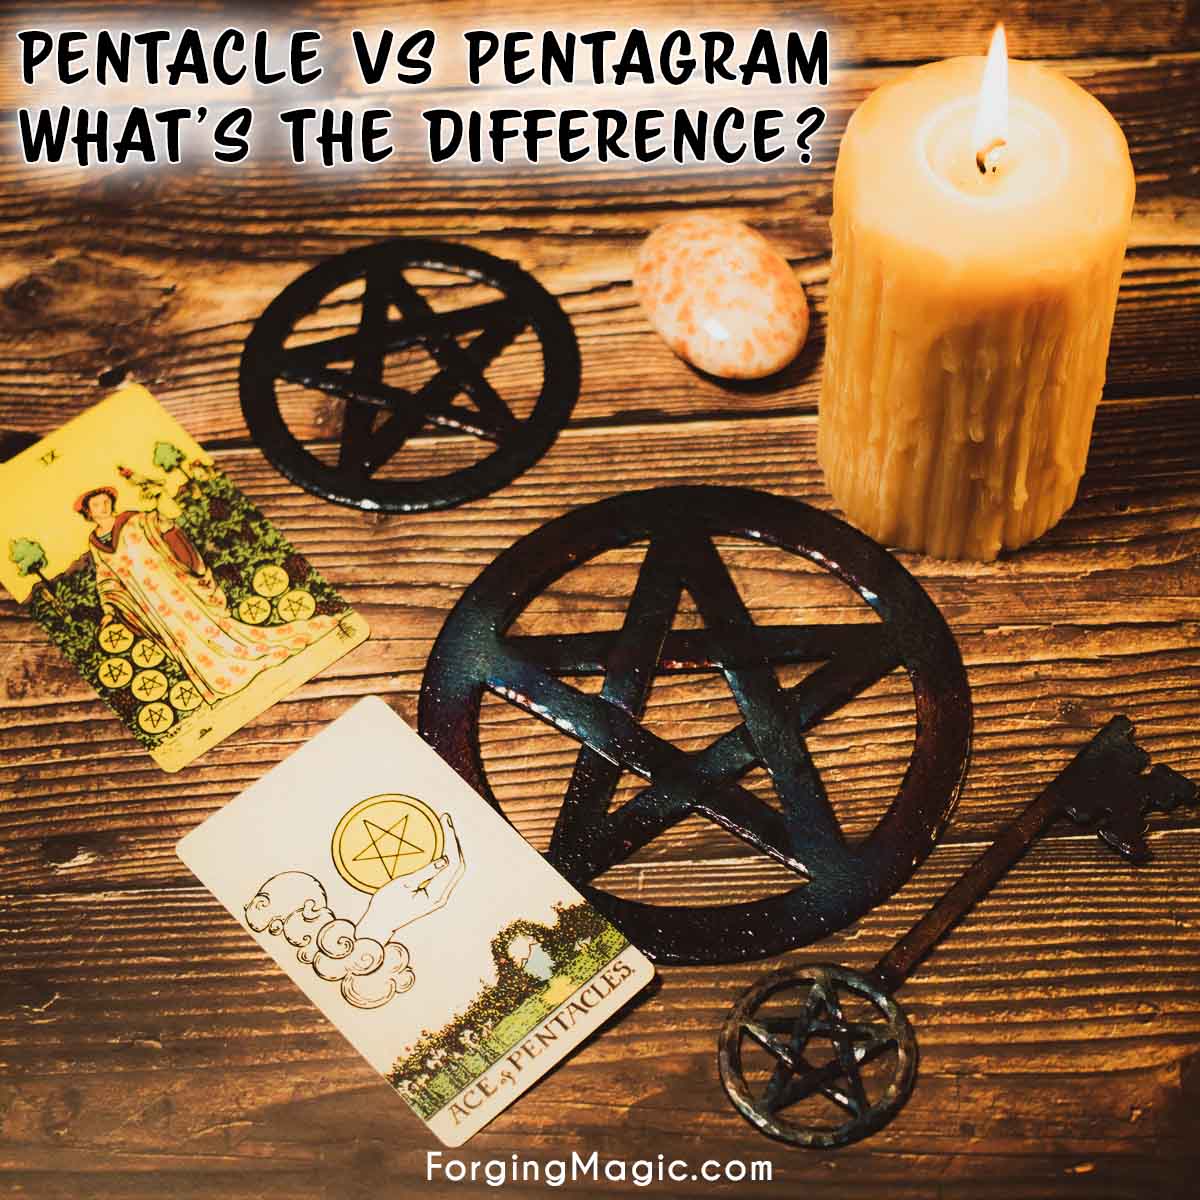 Iron pentacles and an iron pentacle key with pentacle tarot cards and a candle. Text says Pentacle vs Pentagram, what's the difference.